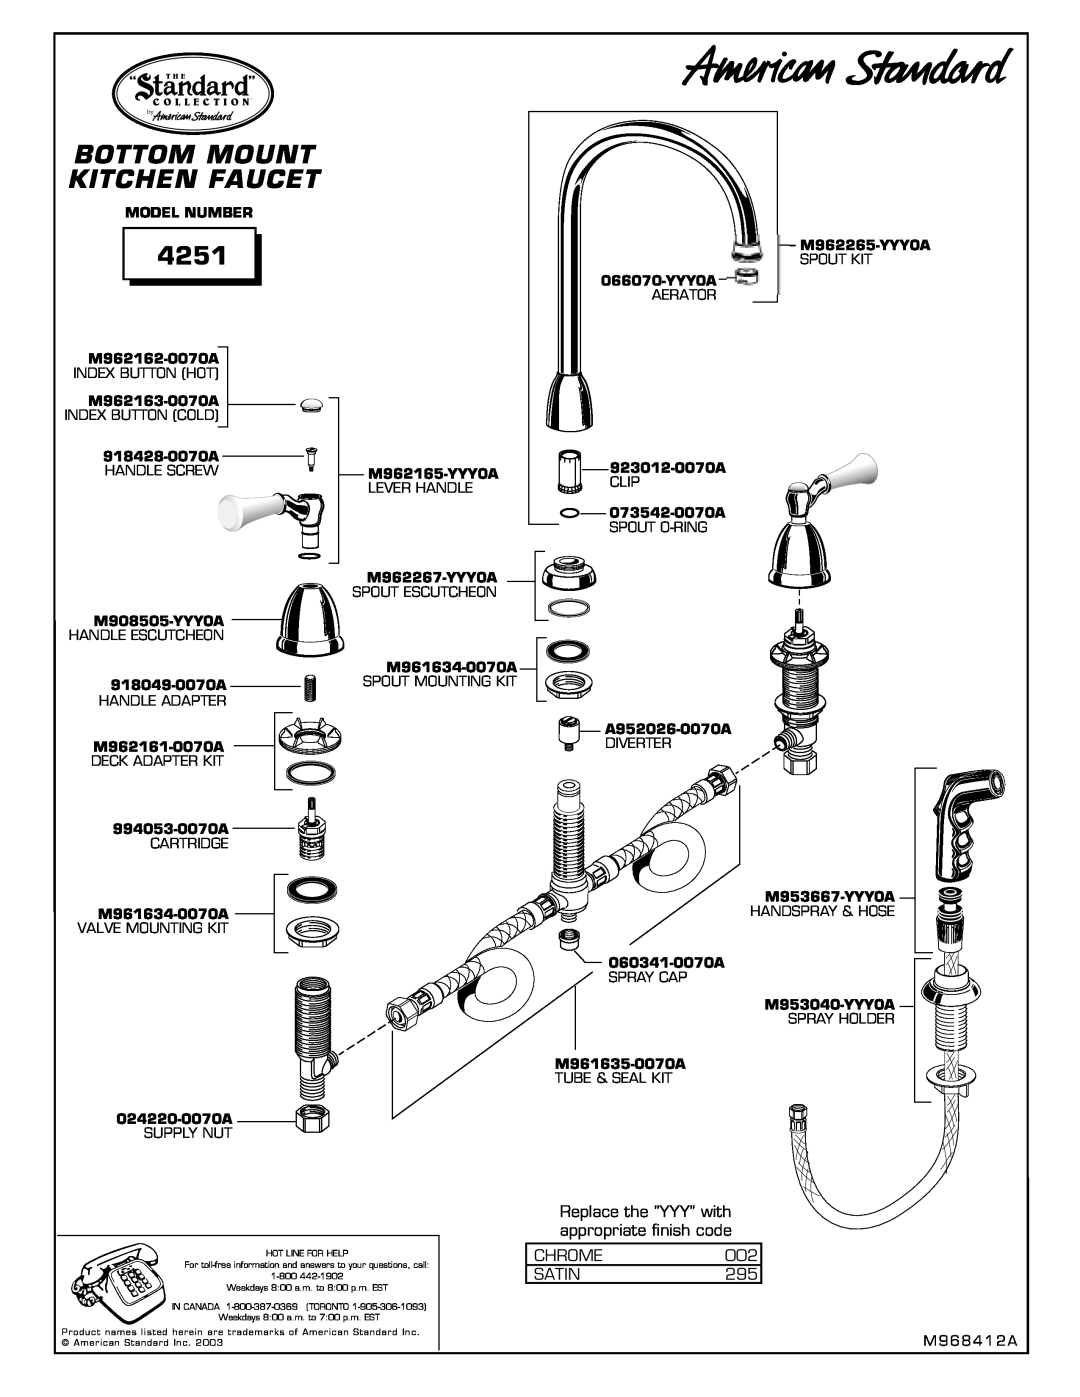 American Standard M968412A Bottom Mount Kitchen Faucet, 4251, Replace the YYY with appropriate finish code, Chrome, Satin 